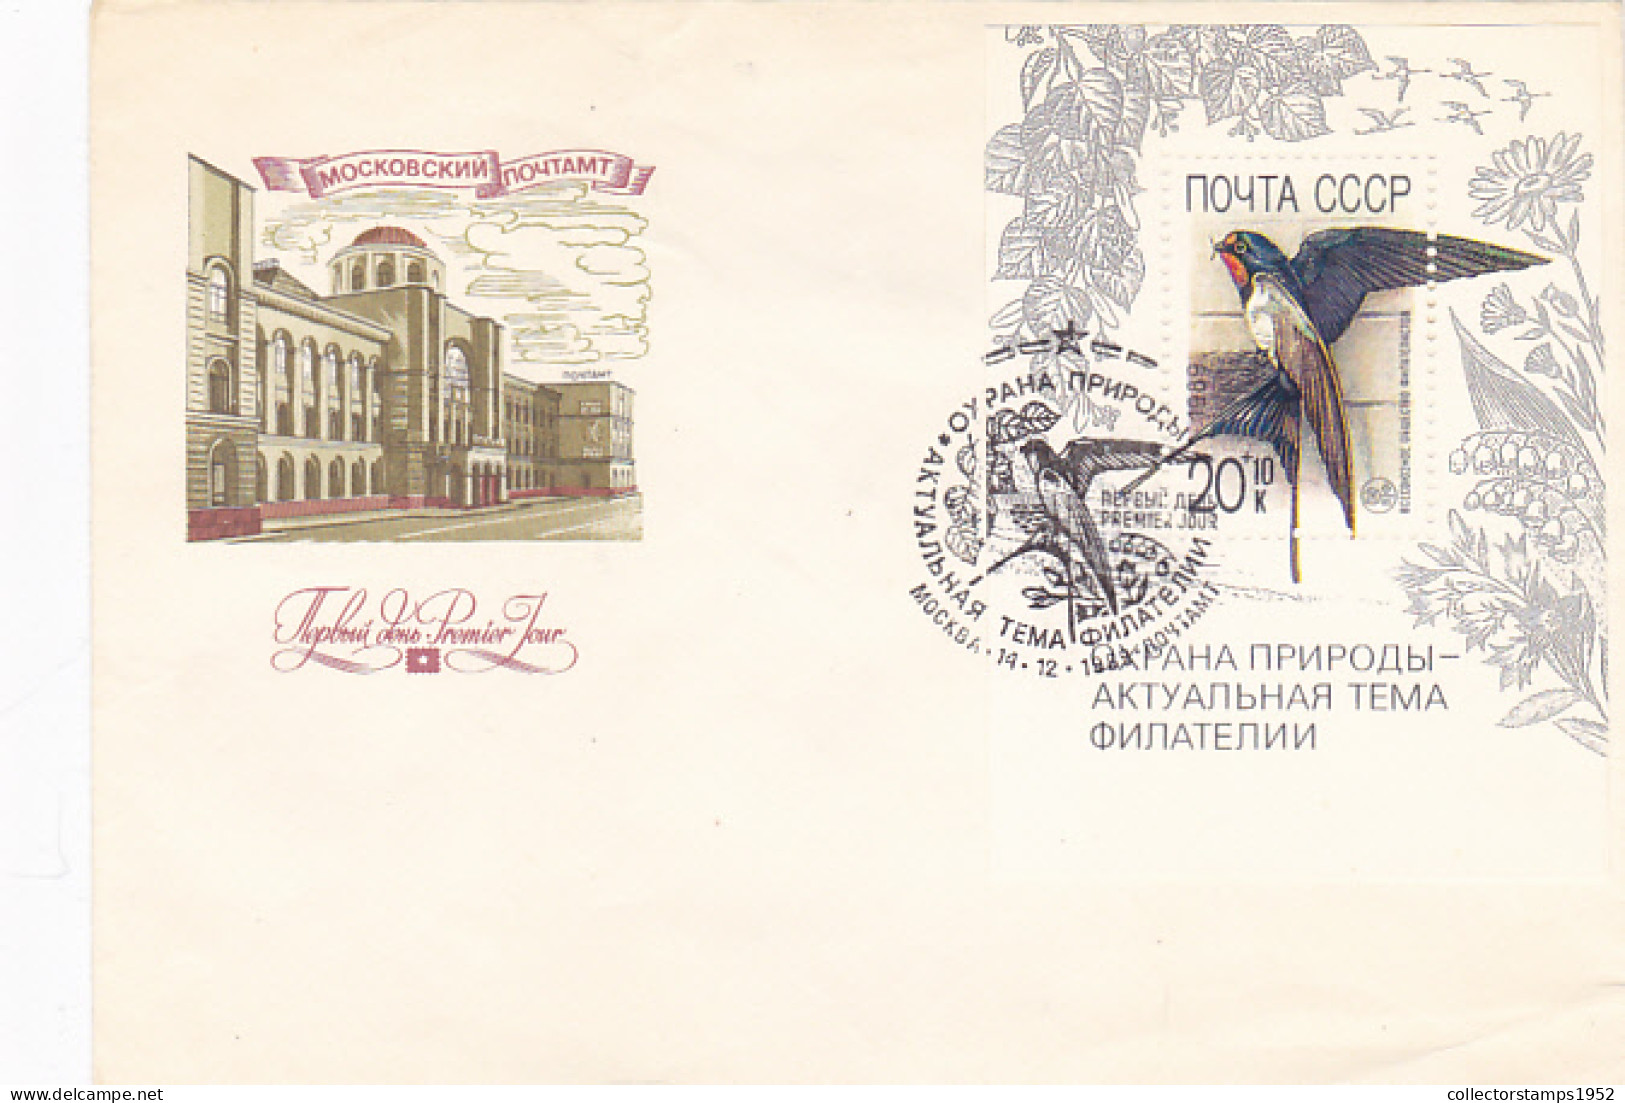 SWALLOW, BIRDS, ANIMALS, SPECIAL POSTMARK AND STAMP SHEET ON MOSCOW POST OFFICE COVER FDC, 1989, RUSSIA-USSR - Swallows